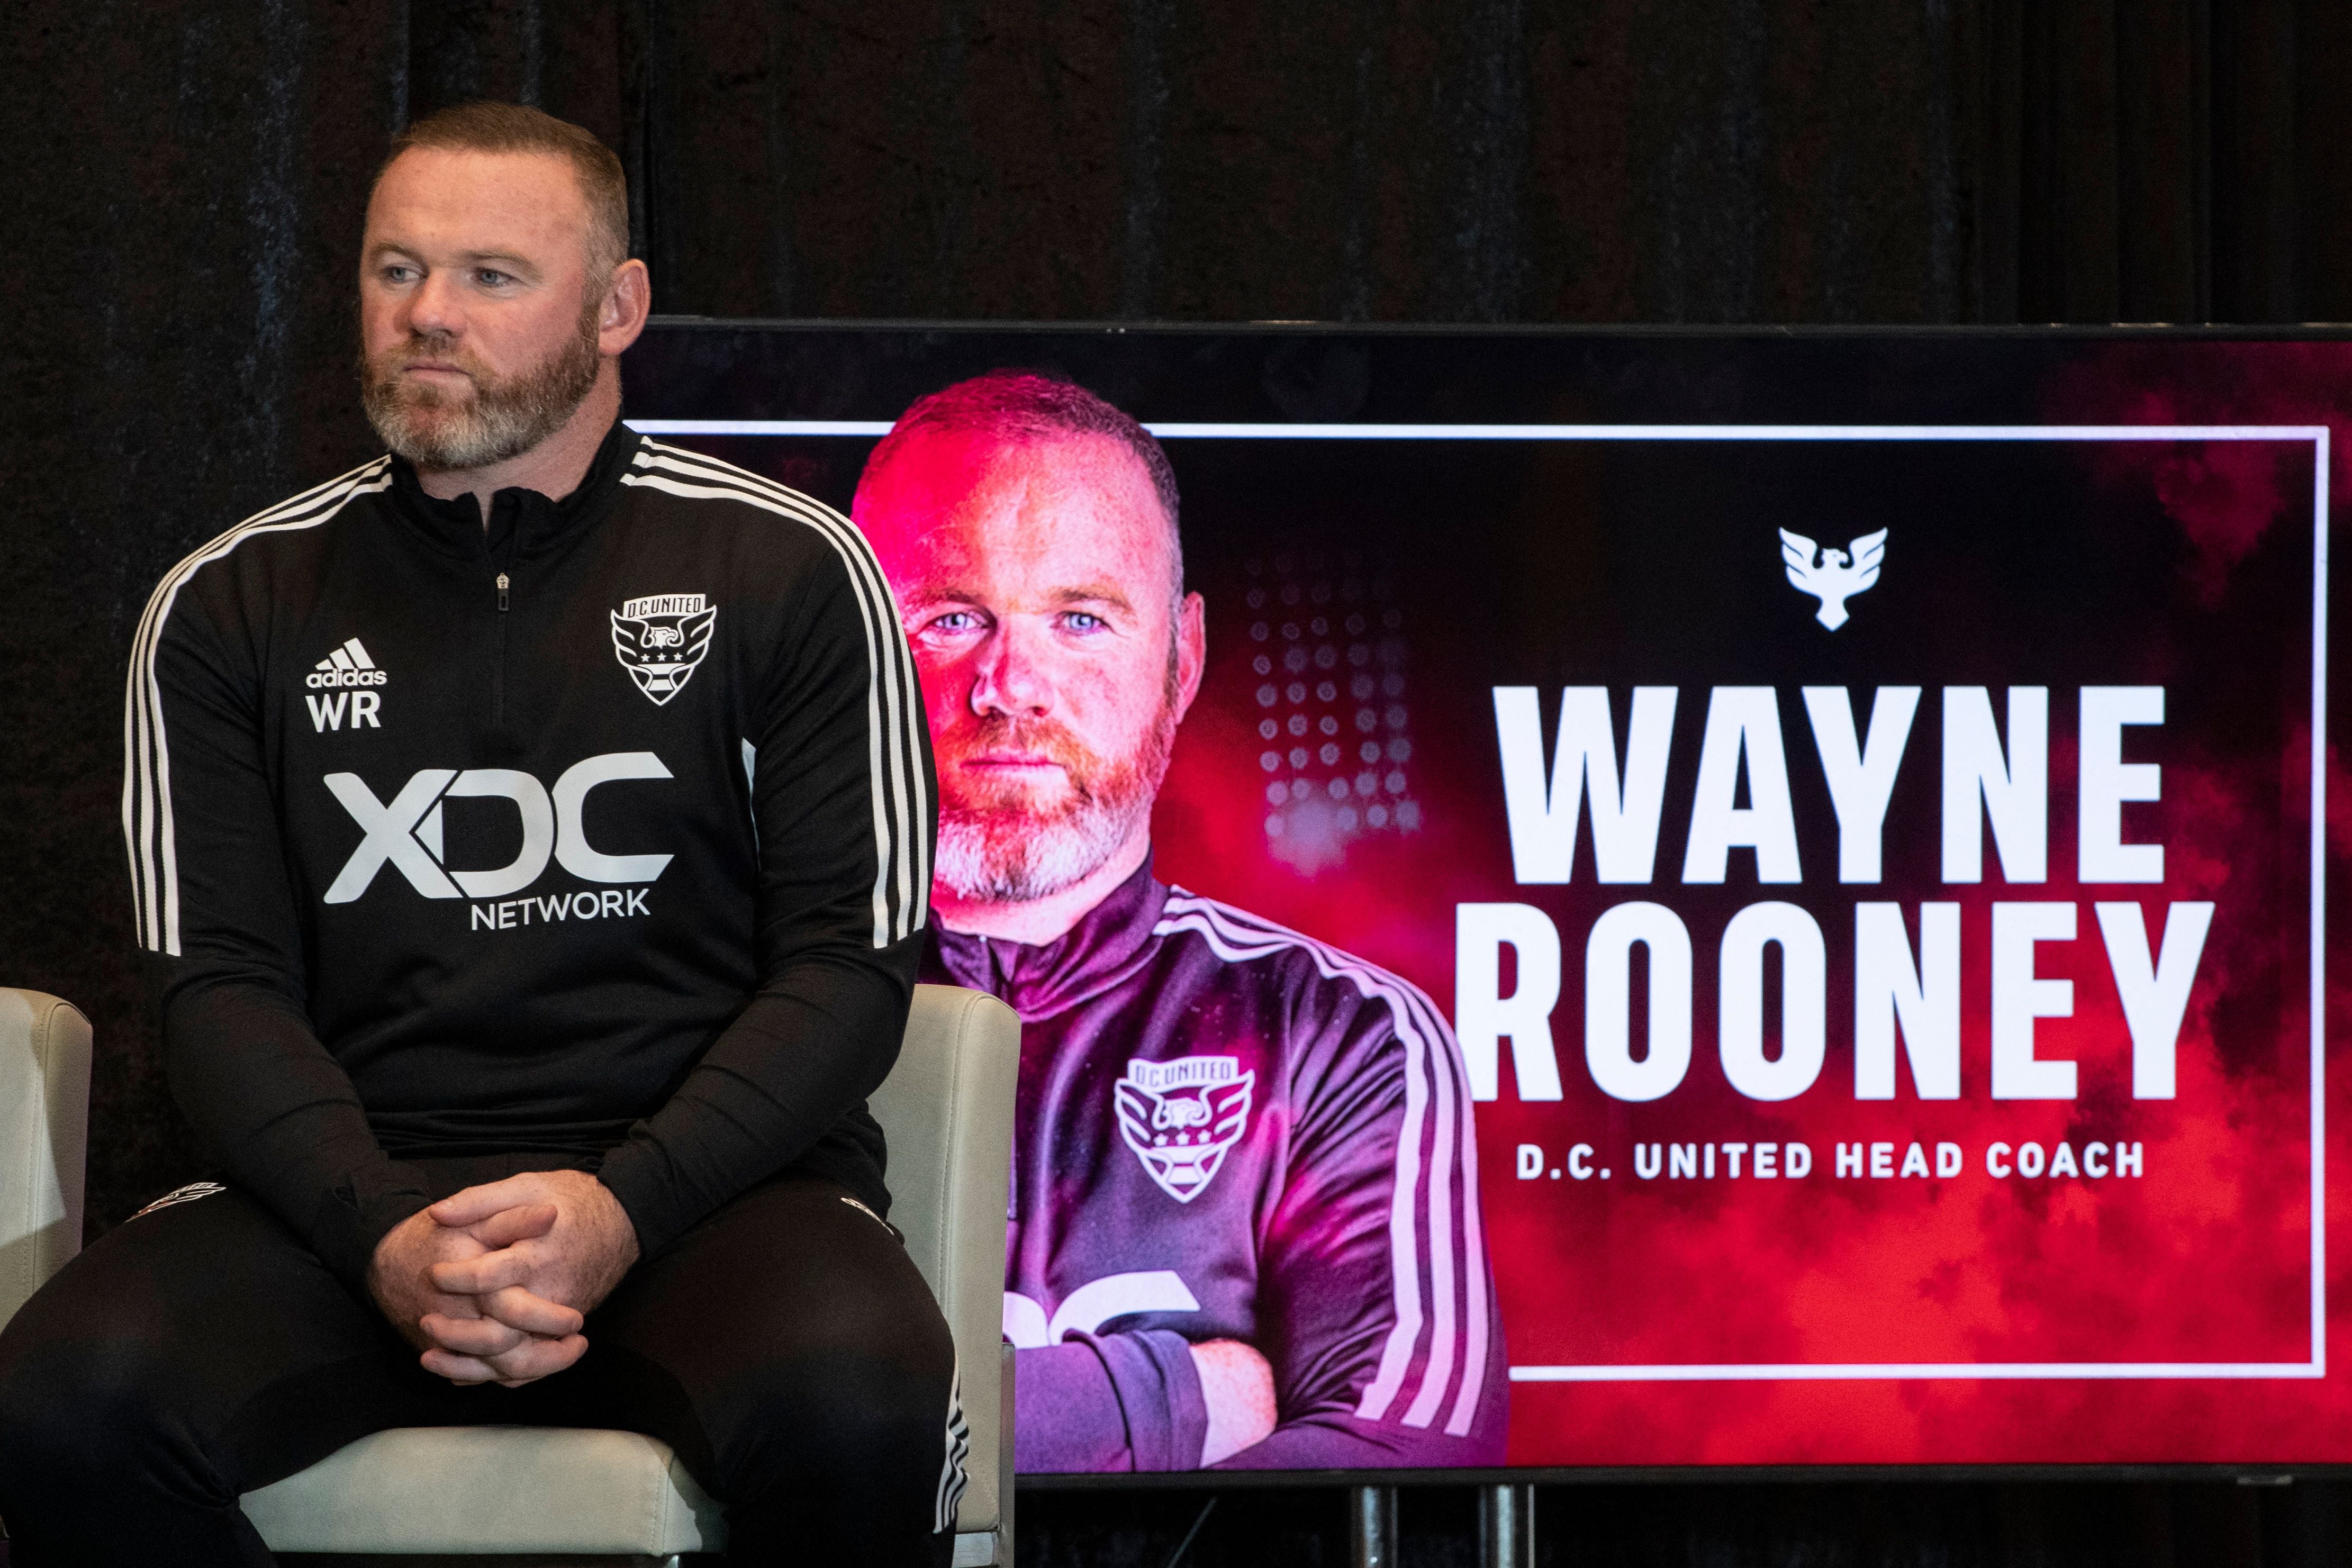 Rooney time as DC boss hasn’t got off to the best start, as the club finished bottom of the MLS Eastern Conference